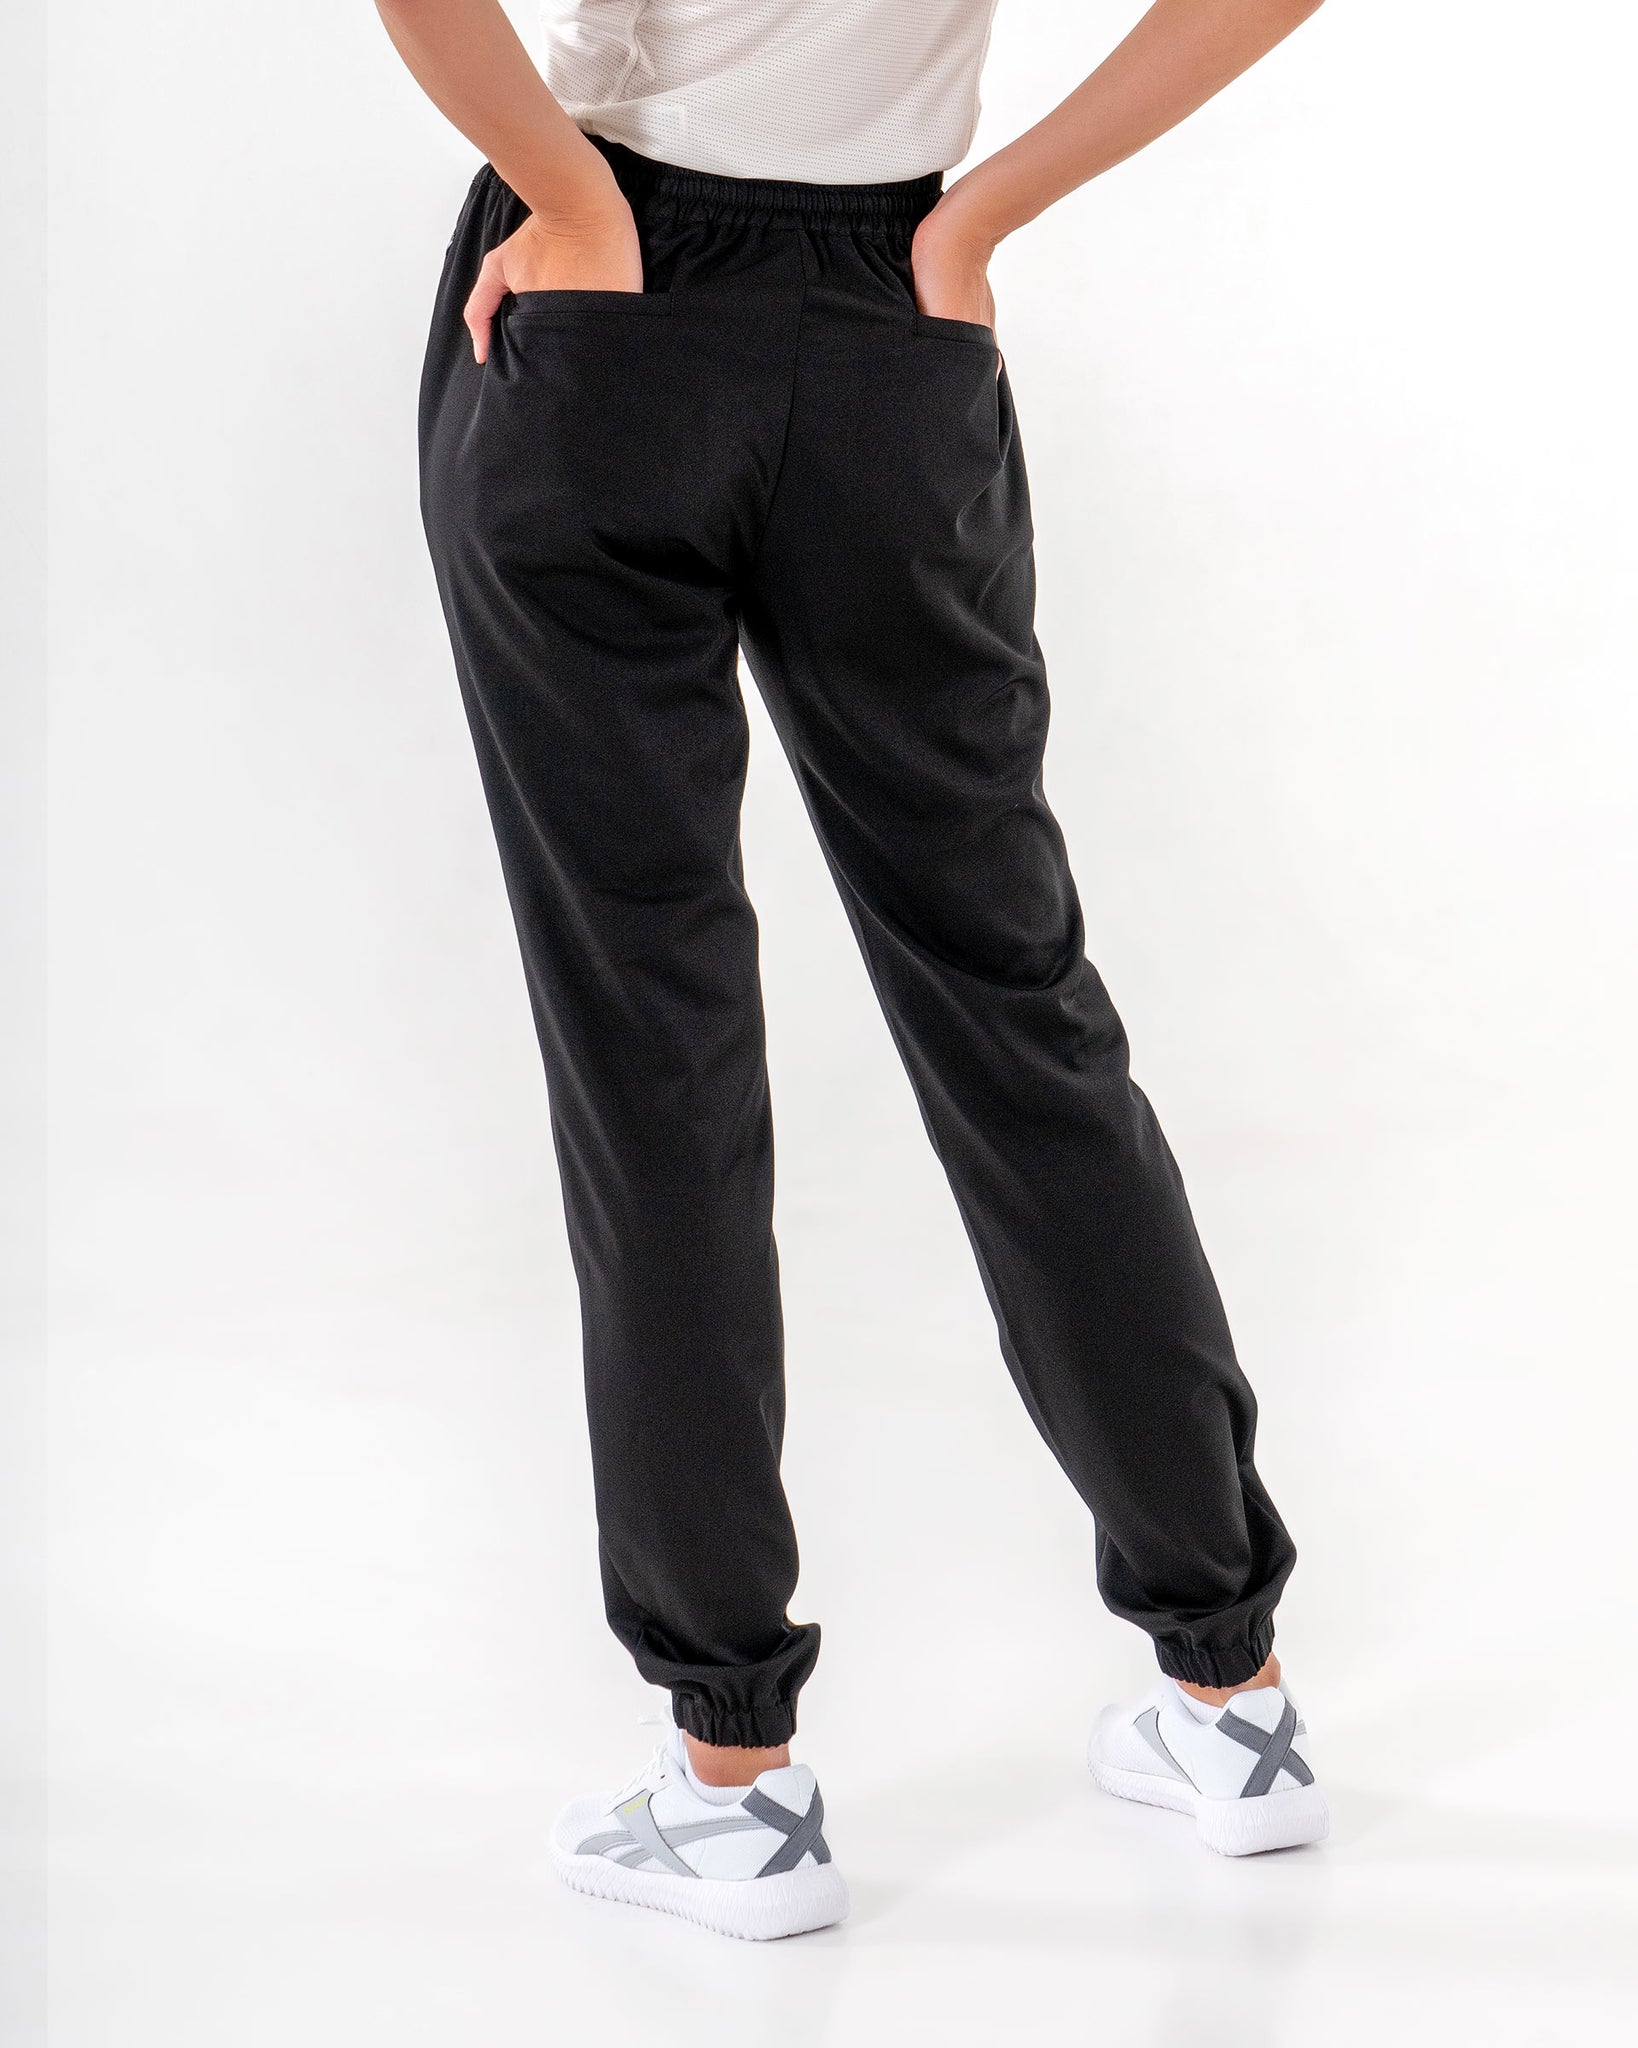 Glider Drawstring Jogger in Black by Veil Garments. Modest activewear collection.